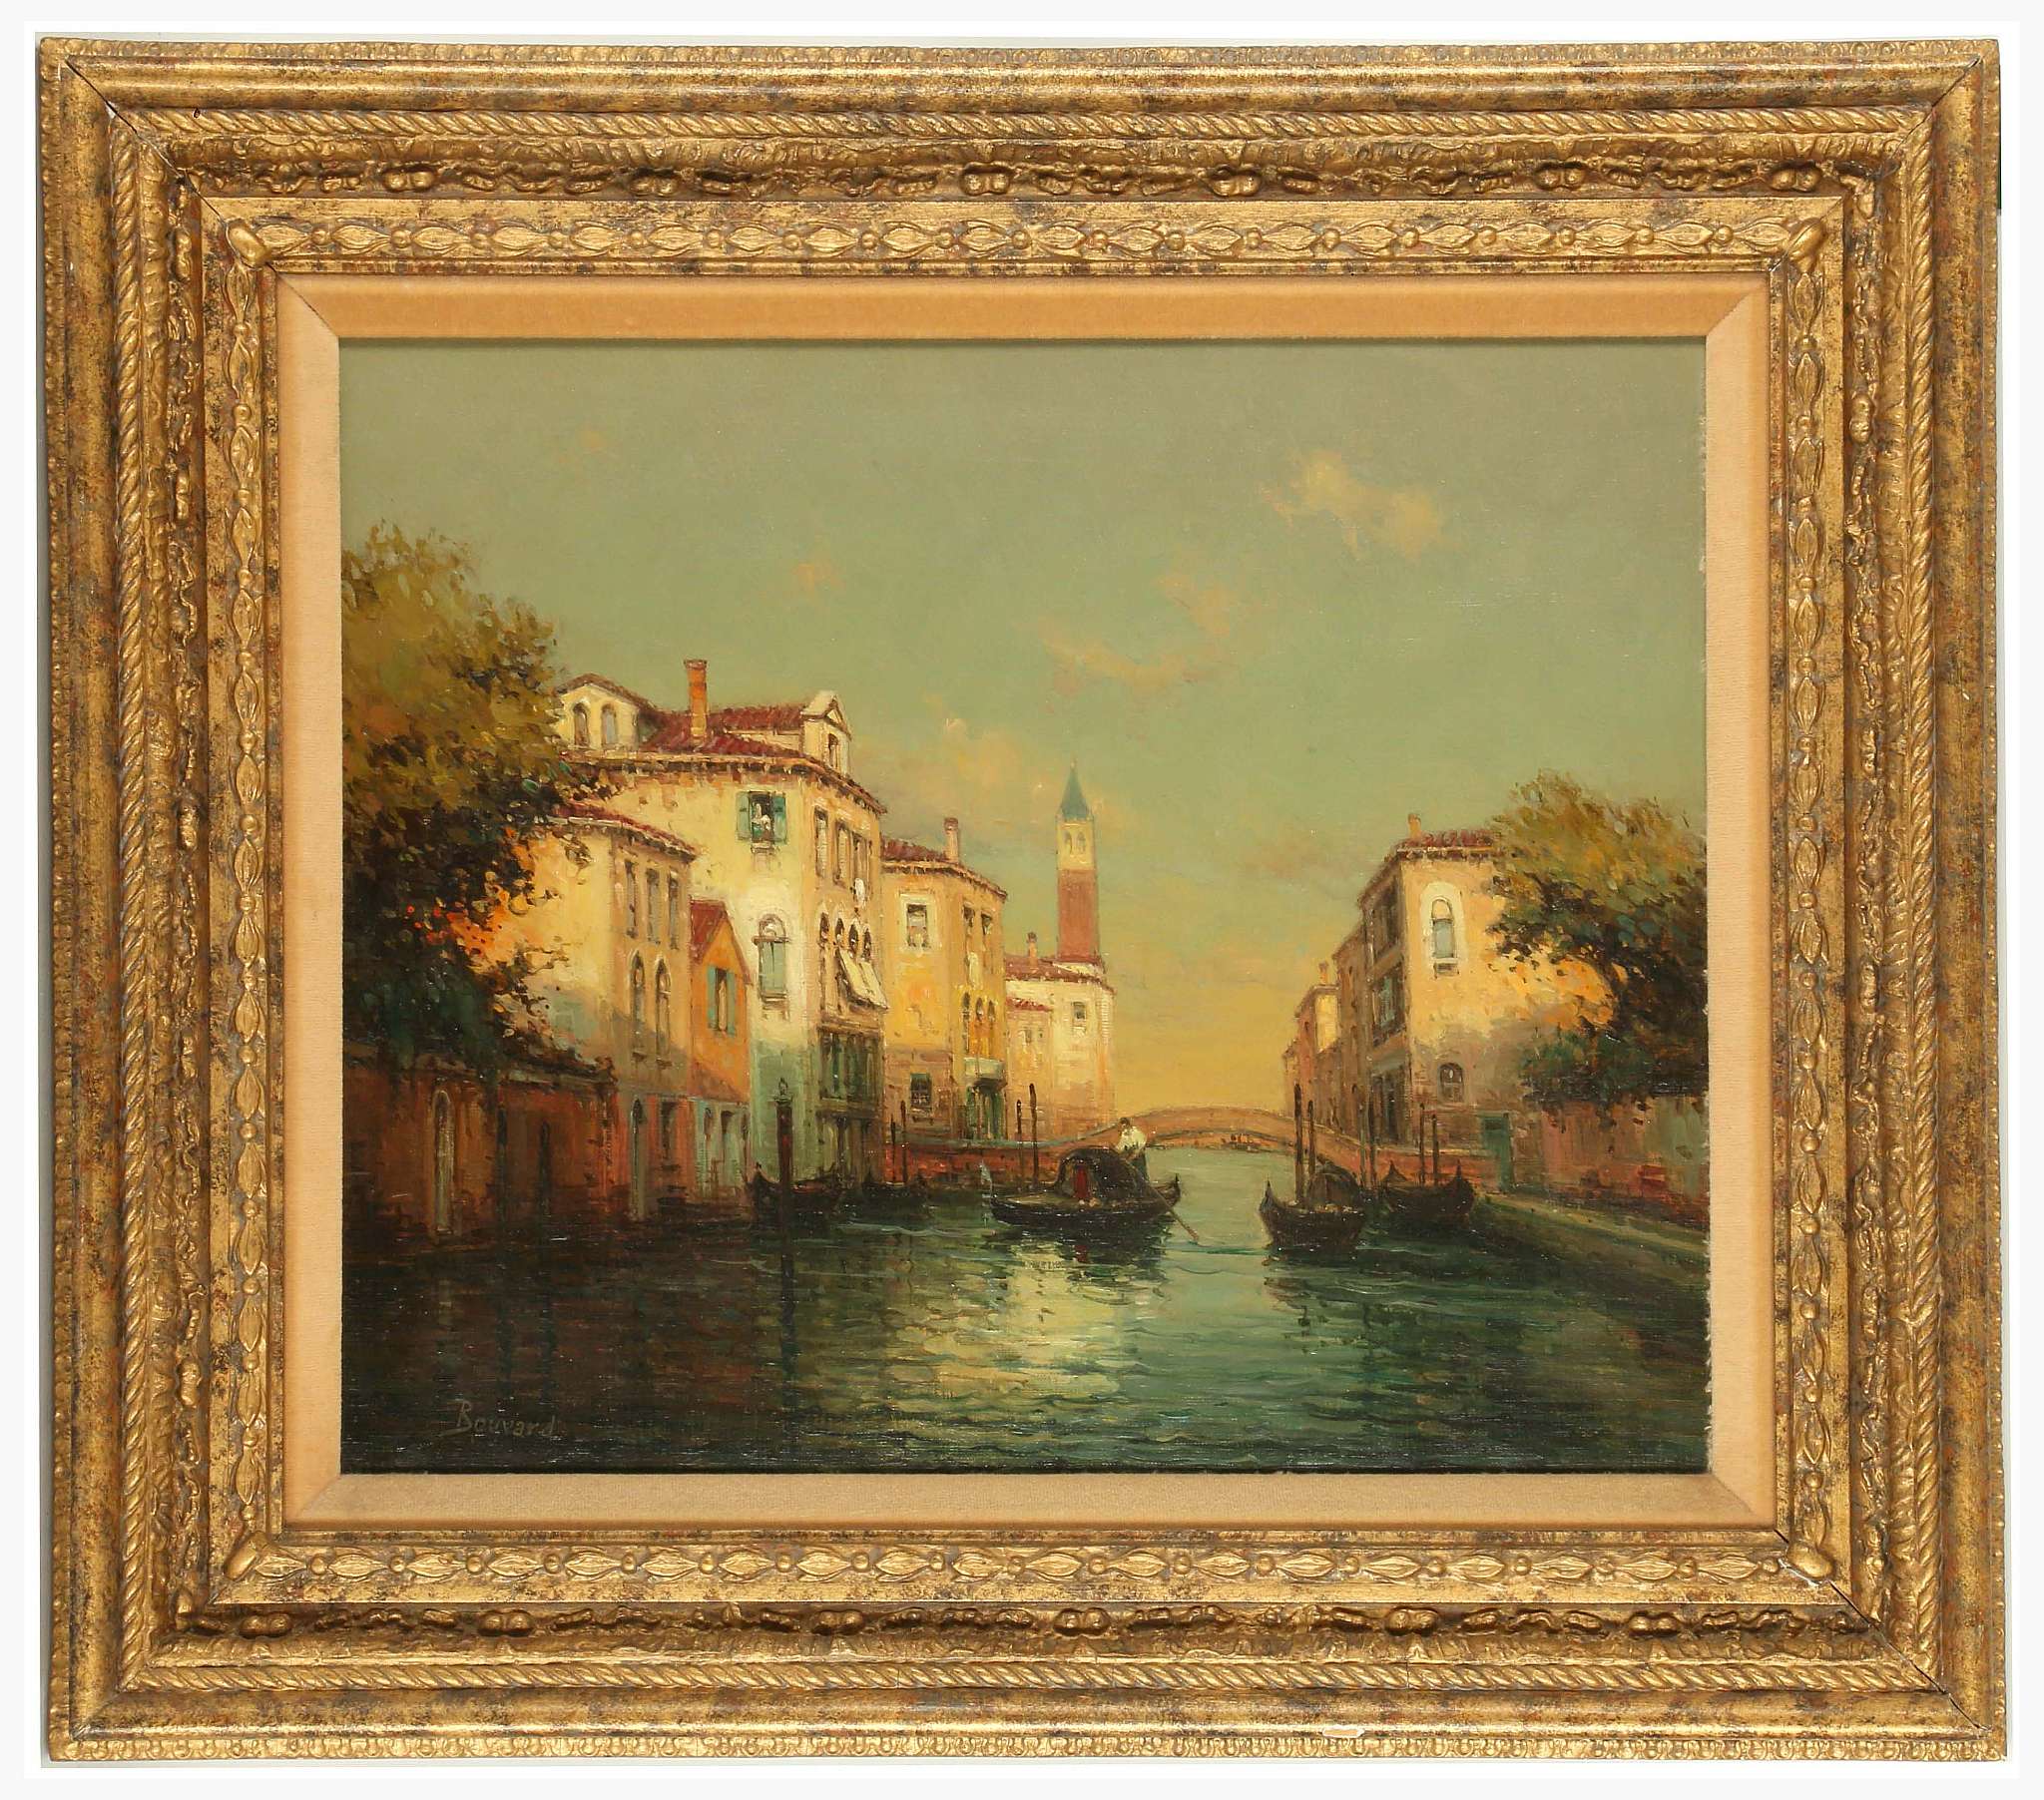 ANTOINE BOUVARD 1870-1956. 'Gondolier in a Venetian Backwater'. Oil on canvas canal view. Signed